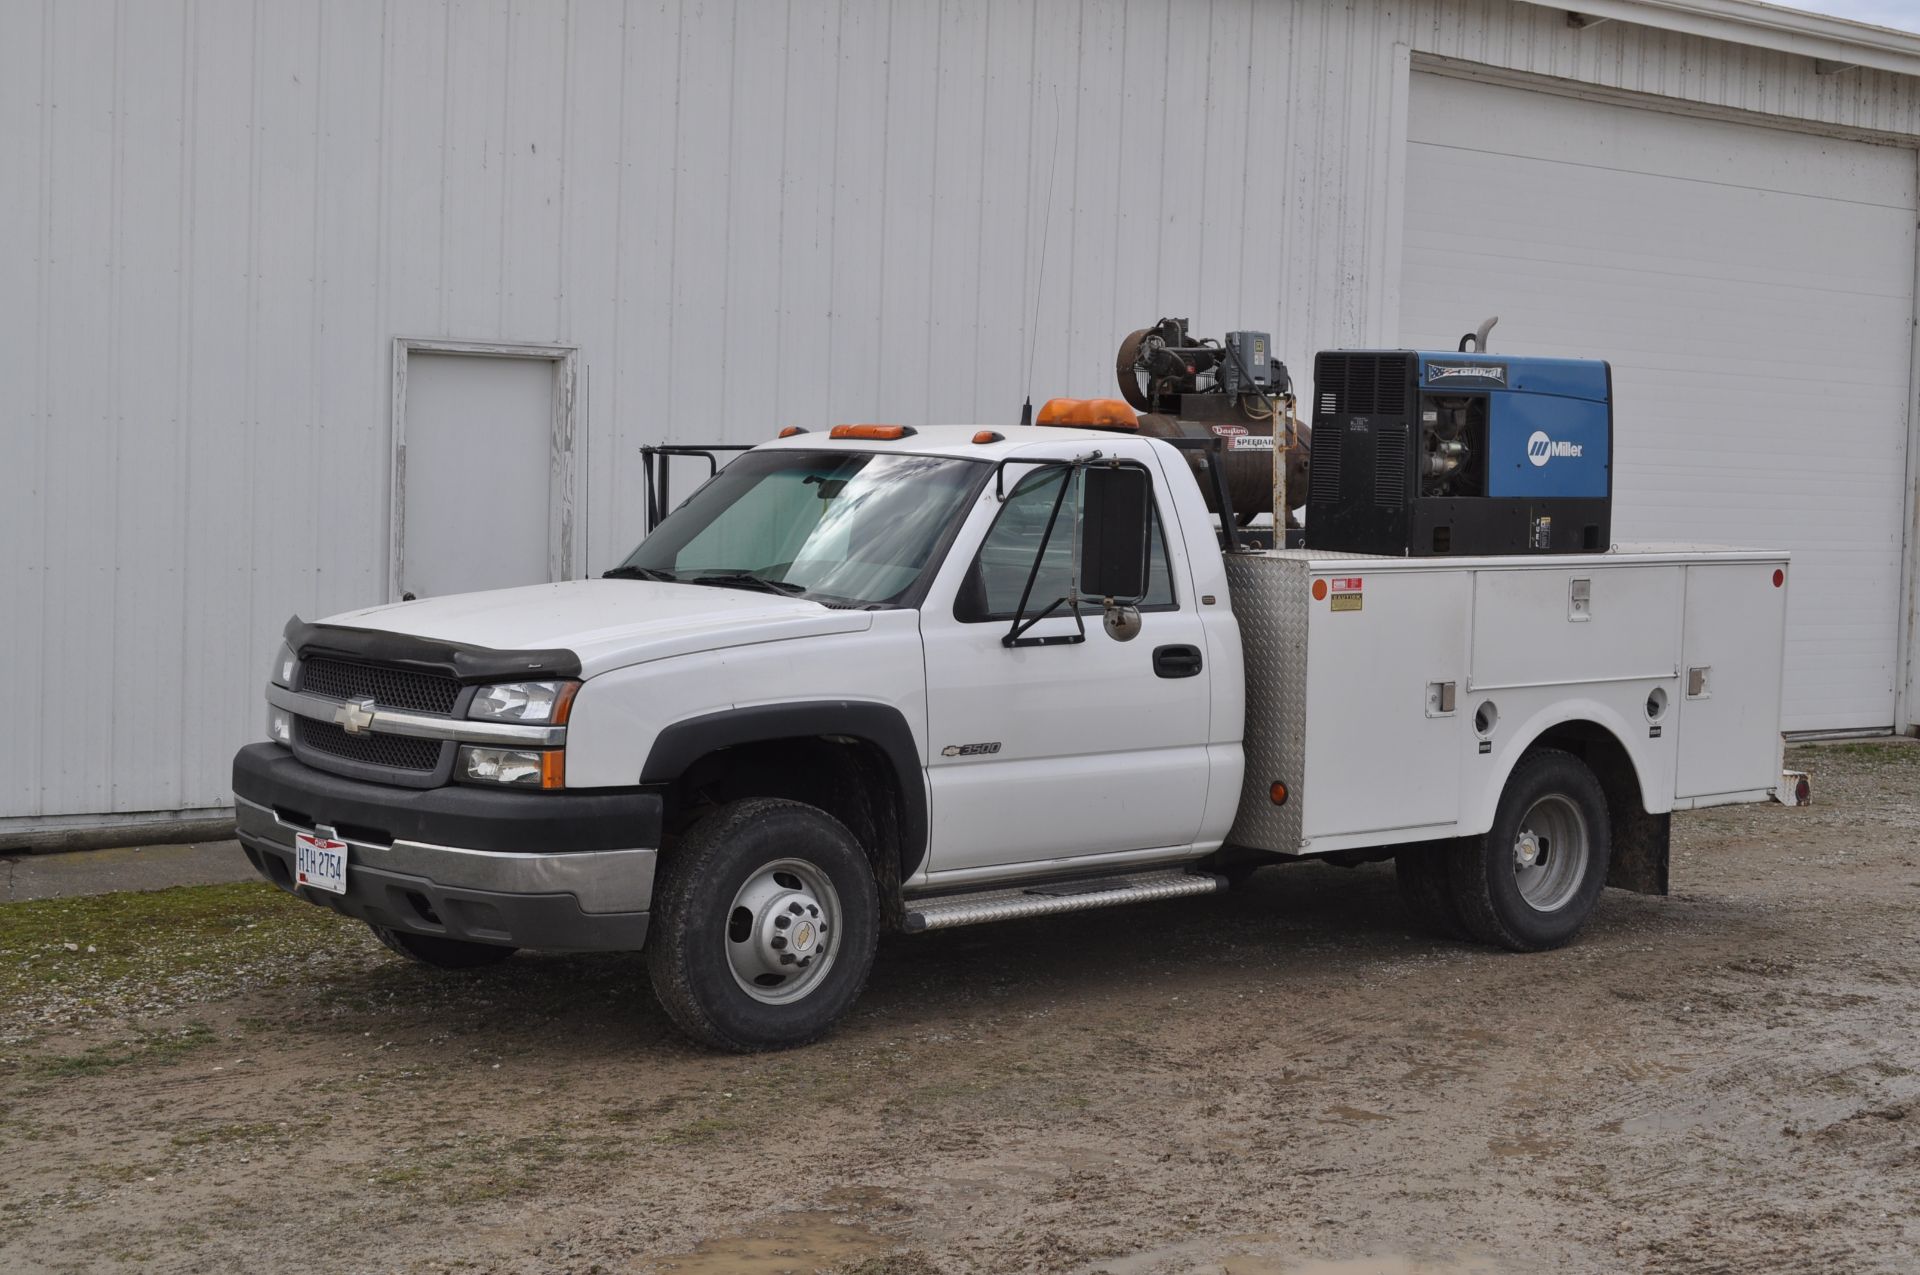 2003 Chevy 3500 service truck, standard cab, V-8 gas, automatic, 4x4, DRW, 42,206 miles, 9’ Stahl - Image 47 of 48